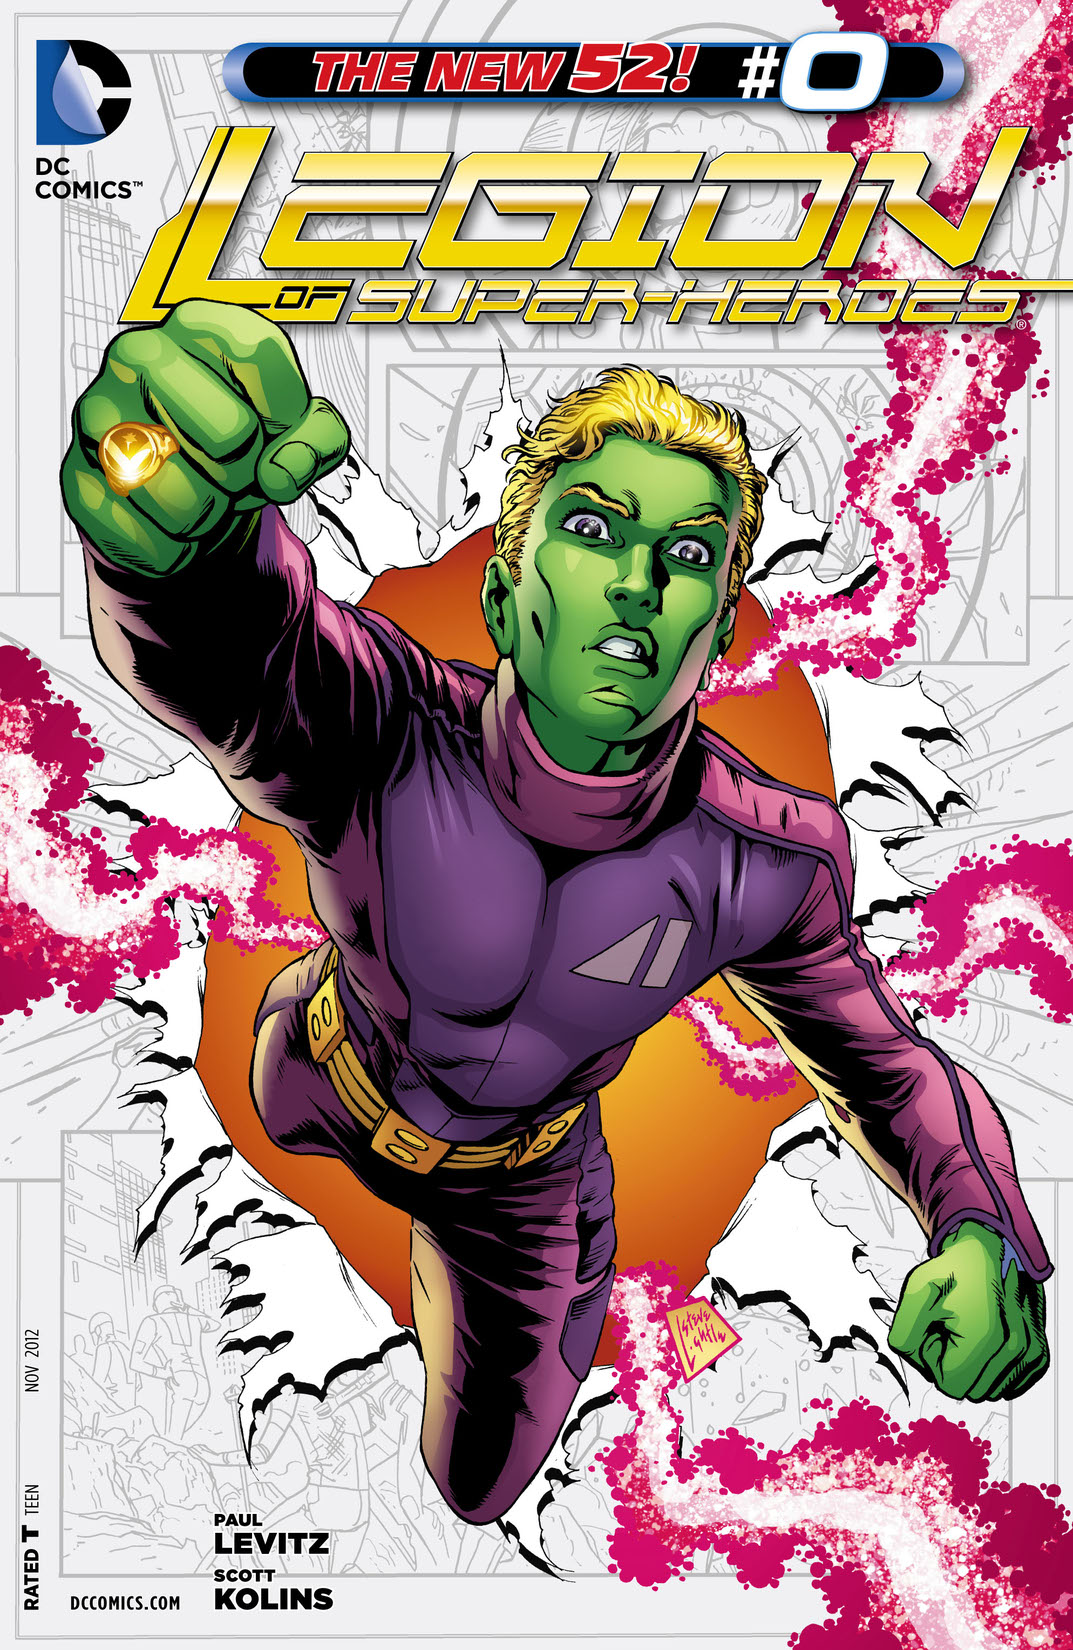 Legion of Super-Heroes (2011-) #0 preview images